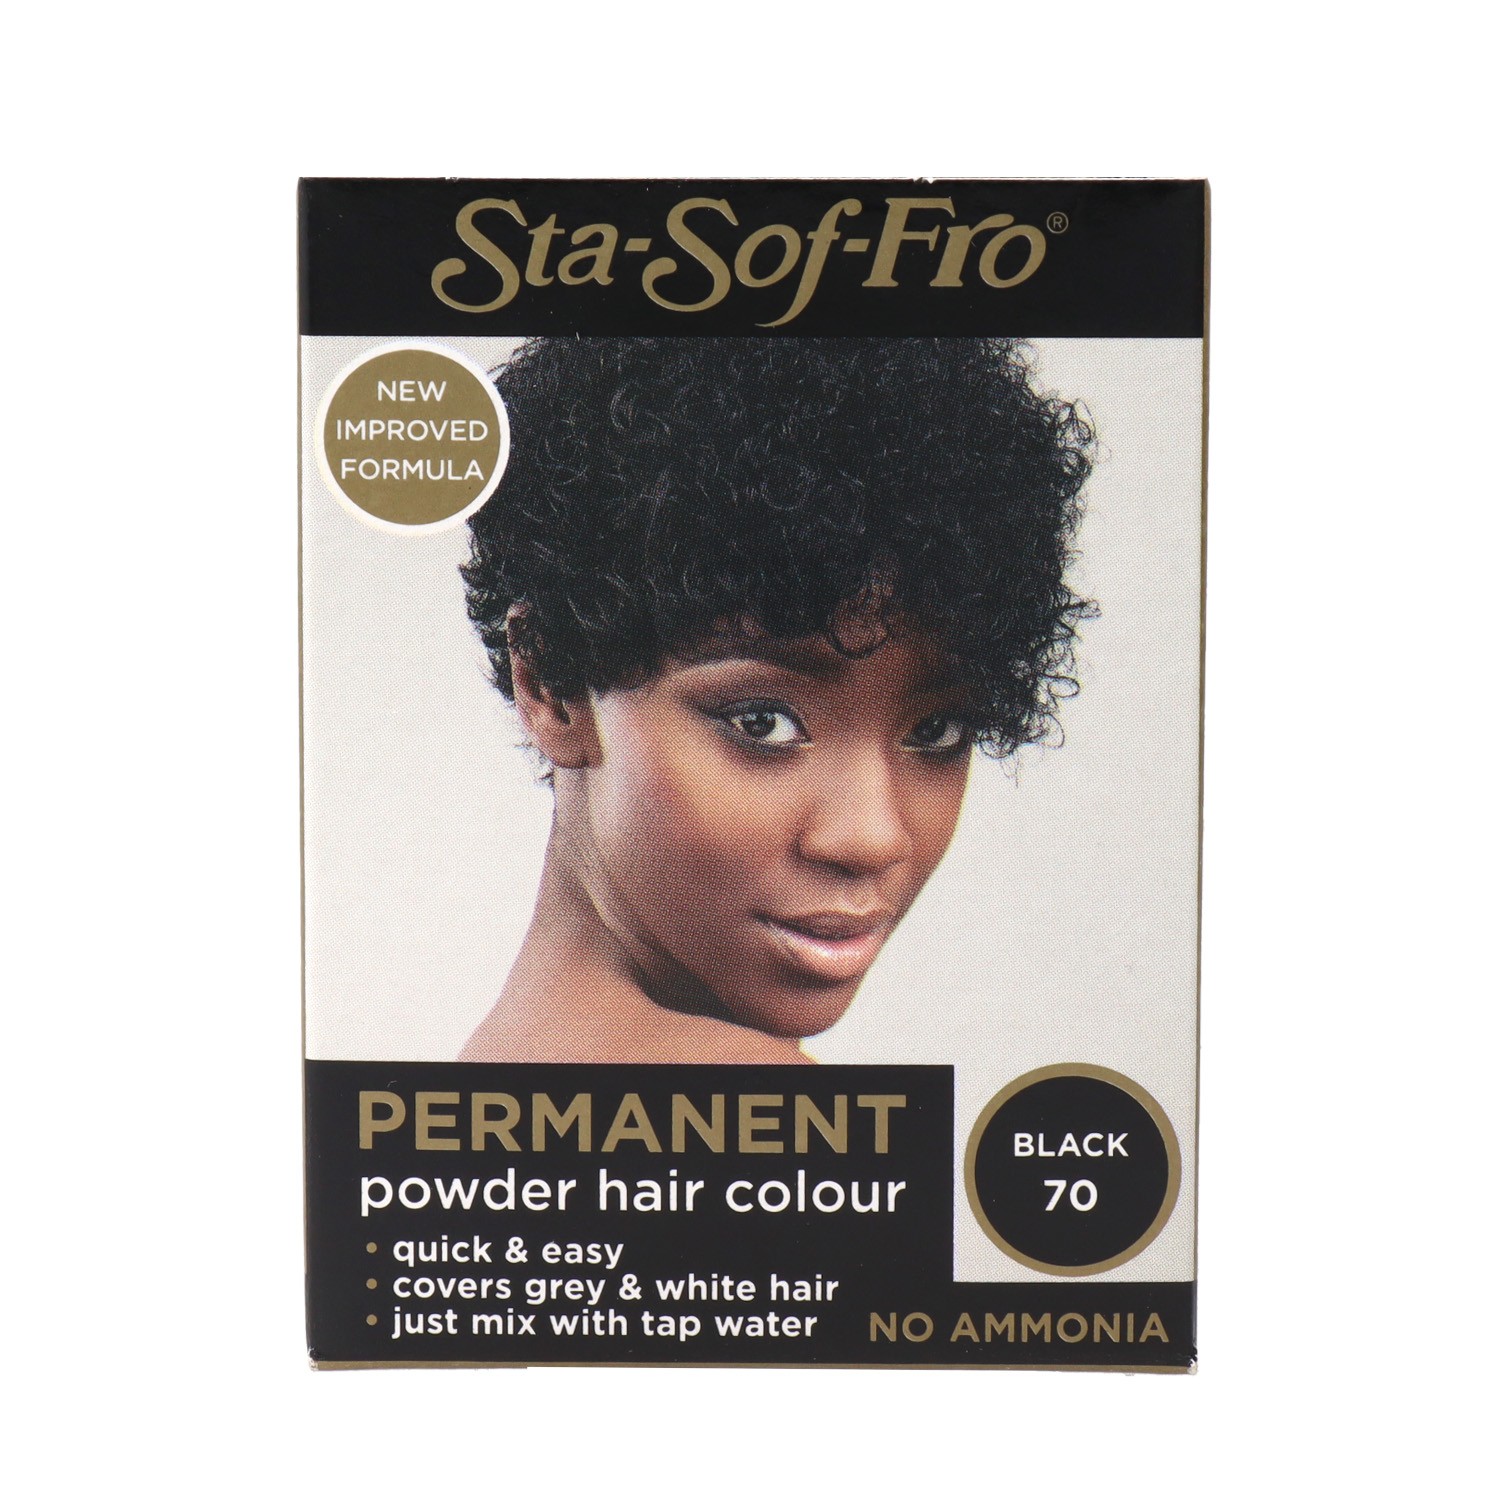 Sta-sof-fro Permanent Powder Hair Color Black 8g